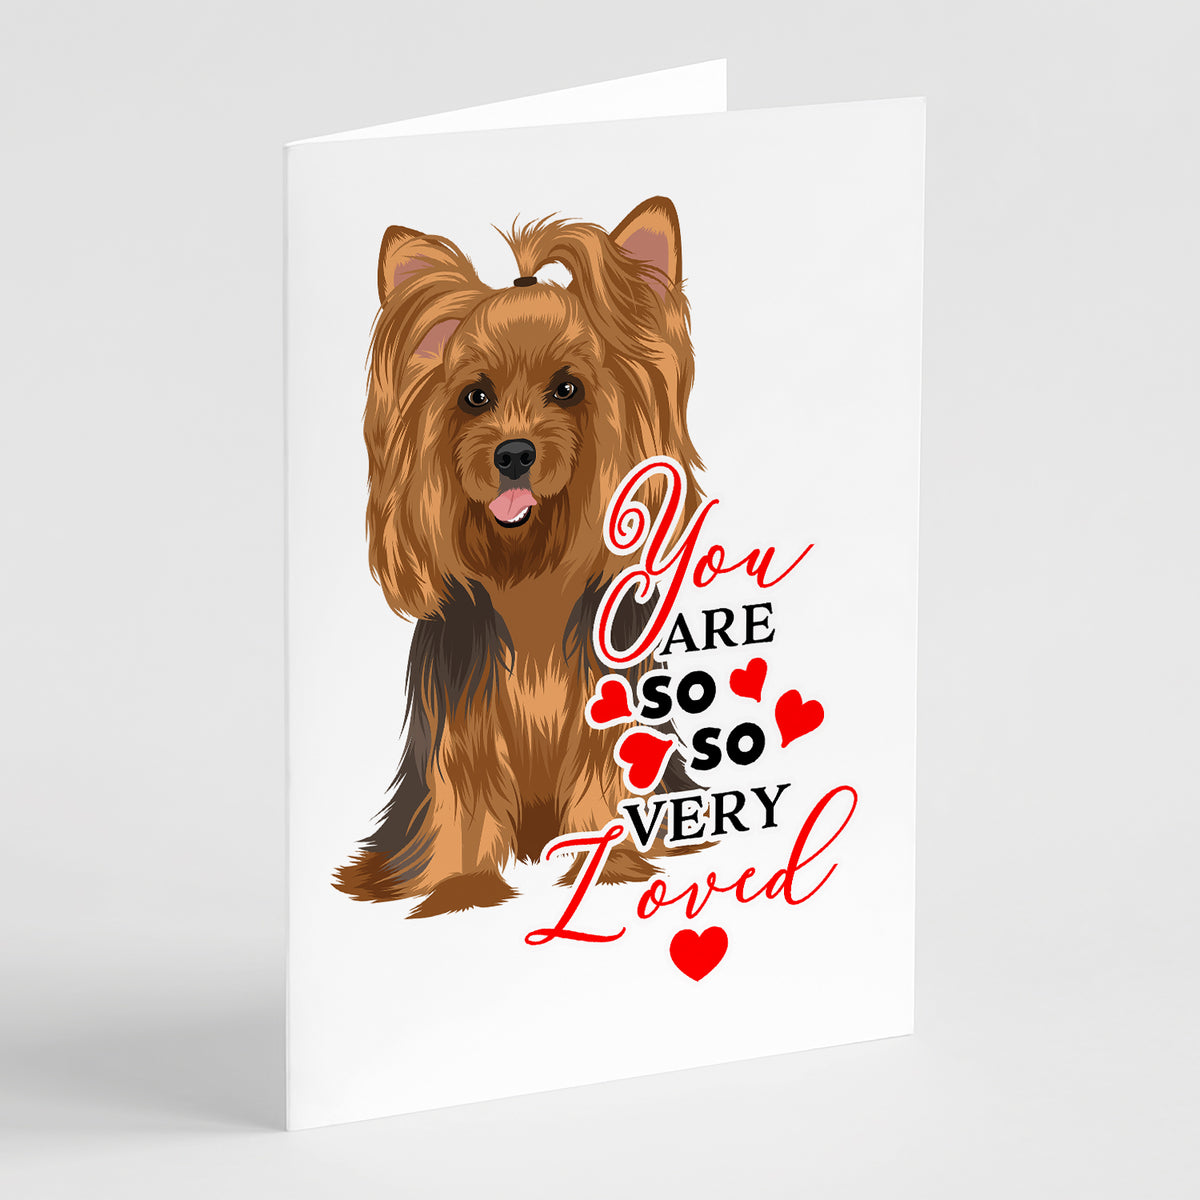 Buy this Yorkie Black and Gold #1 so Loved Greeting Cards and Envelopes Pack of 8